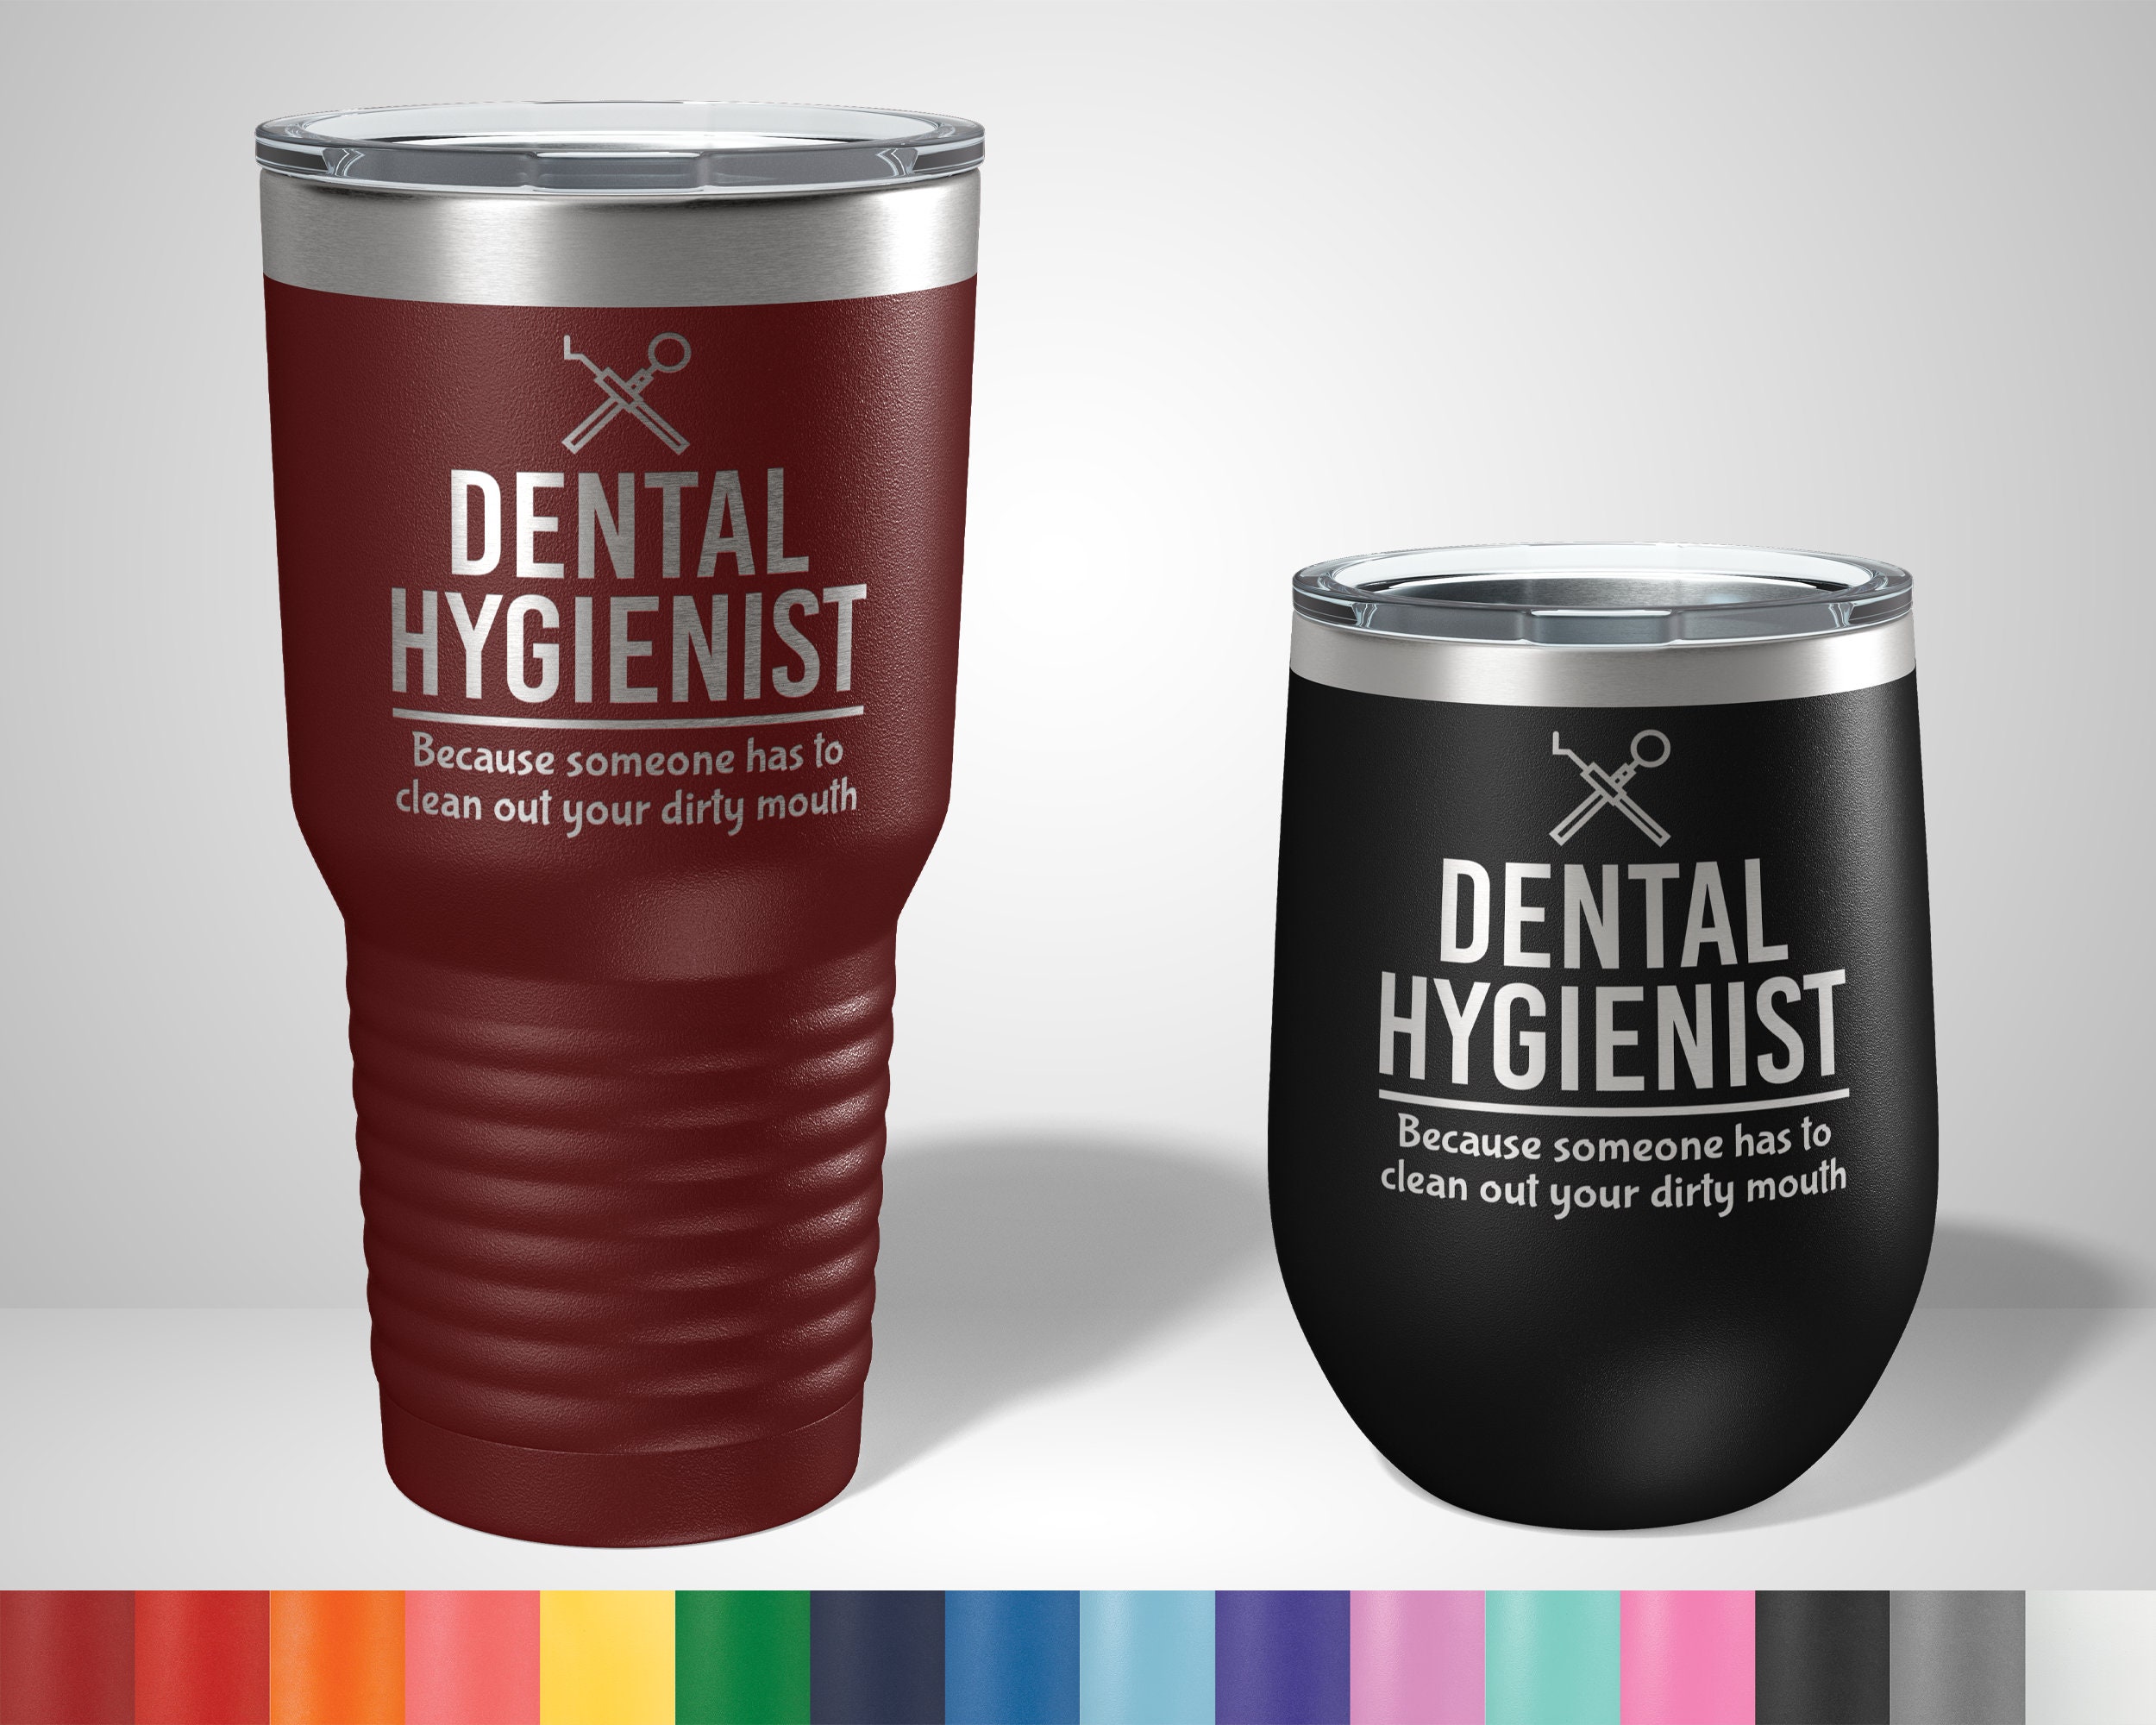 Someone Has to Clean Your Dirty Mouth Dental Hygienist Dental Assistant Personalized Engraved Insulated Stemless Stainless Steel 12 oz Tumbler 